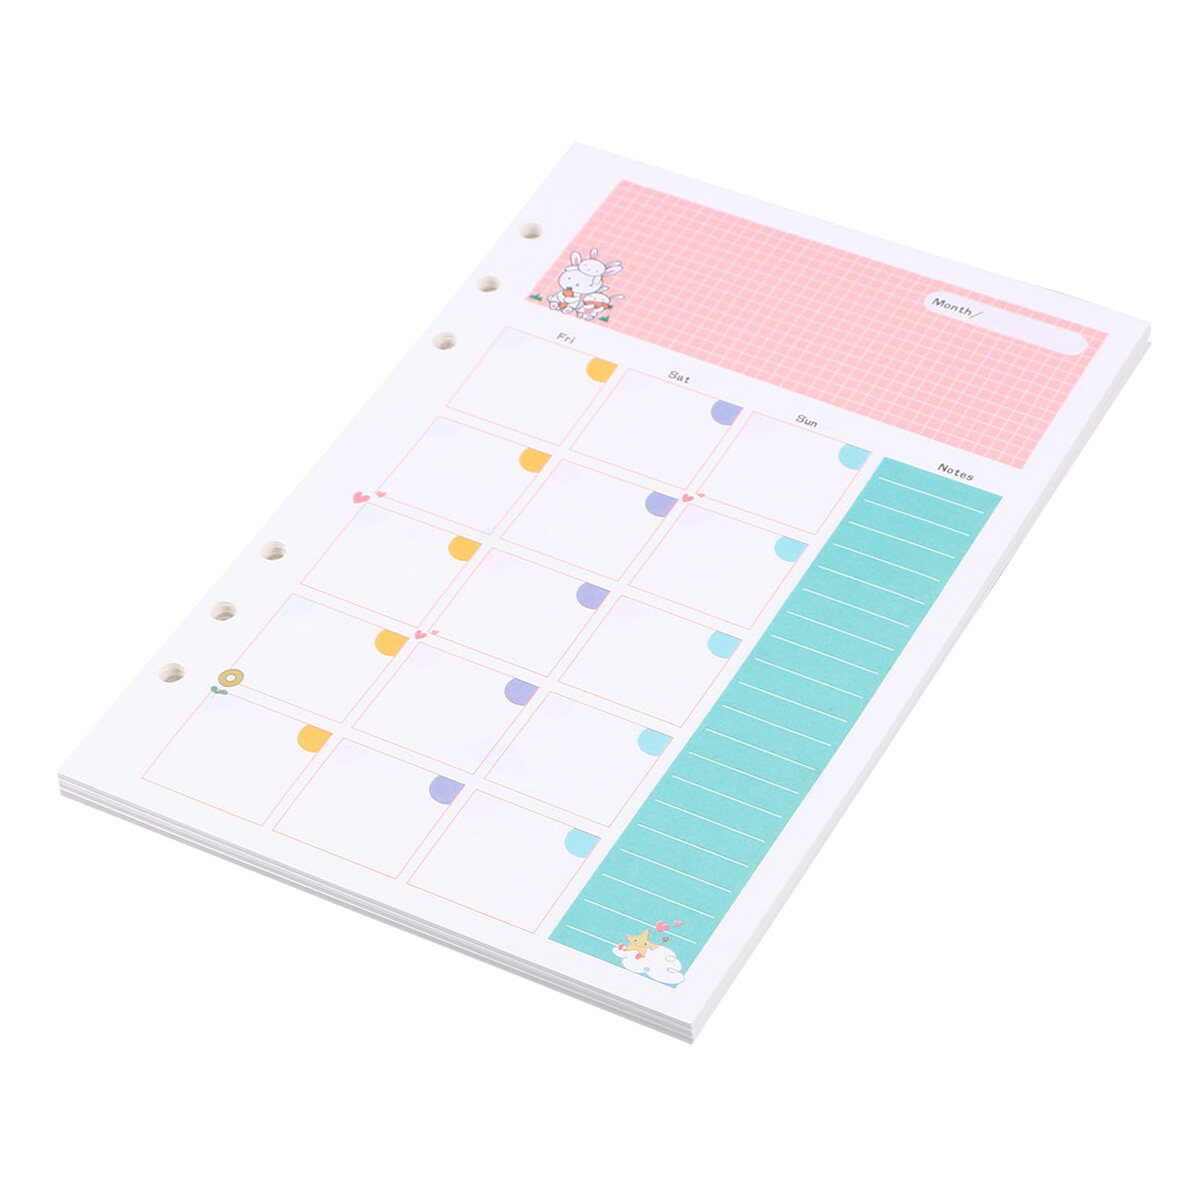 A5 Binder Paper 6 Ring Planner Refill Refills Refillable Filler Pages Hole Inserts, Size: 1Pcs